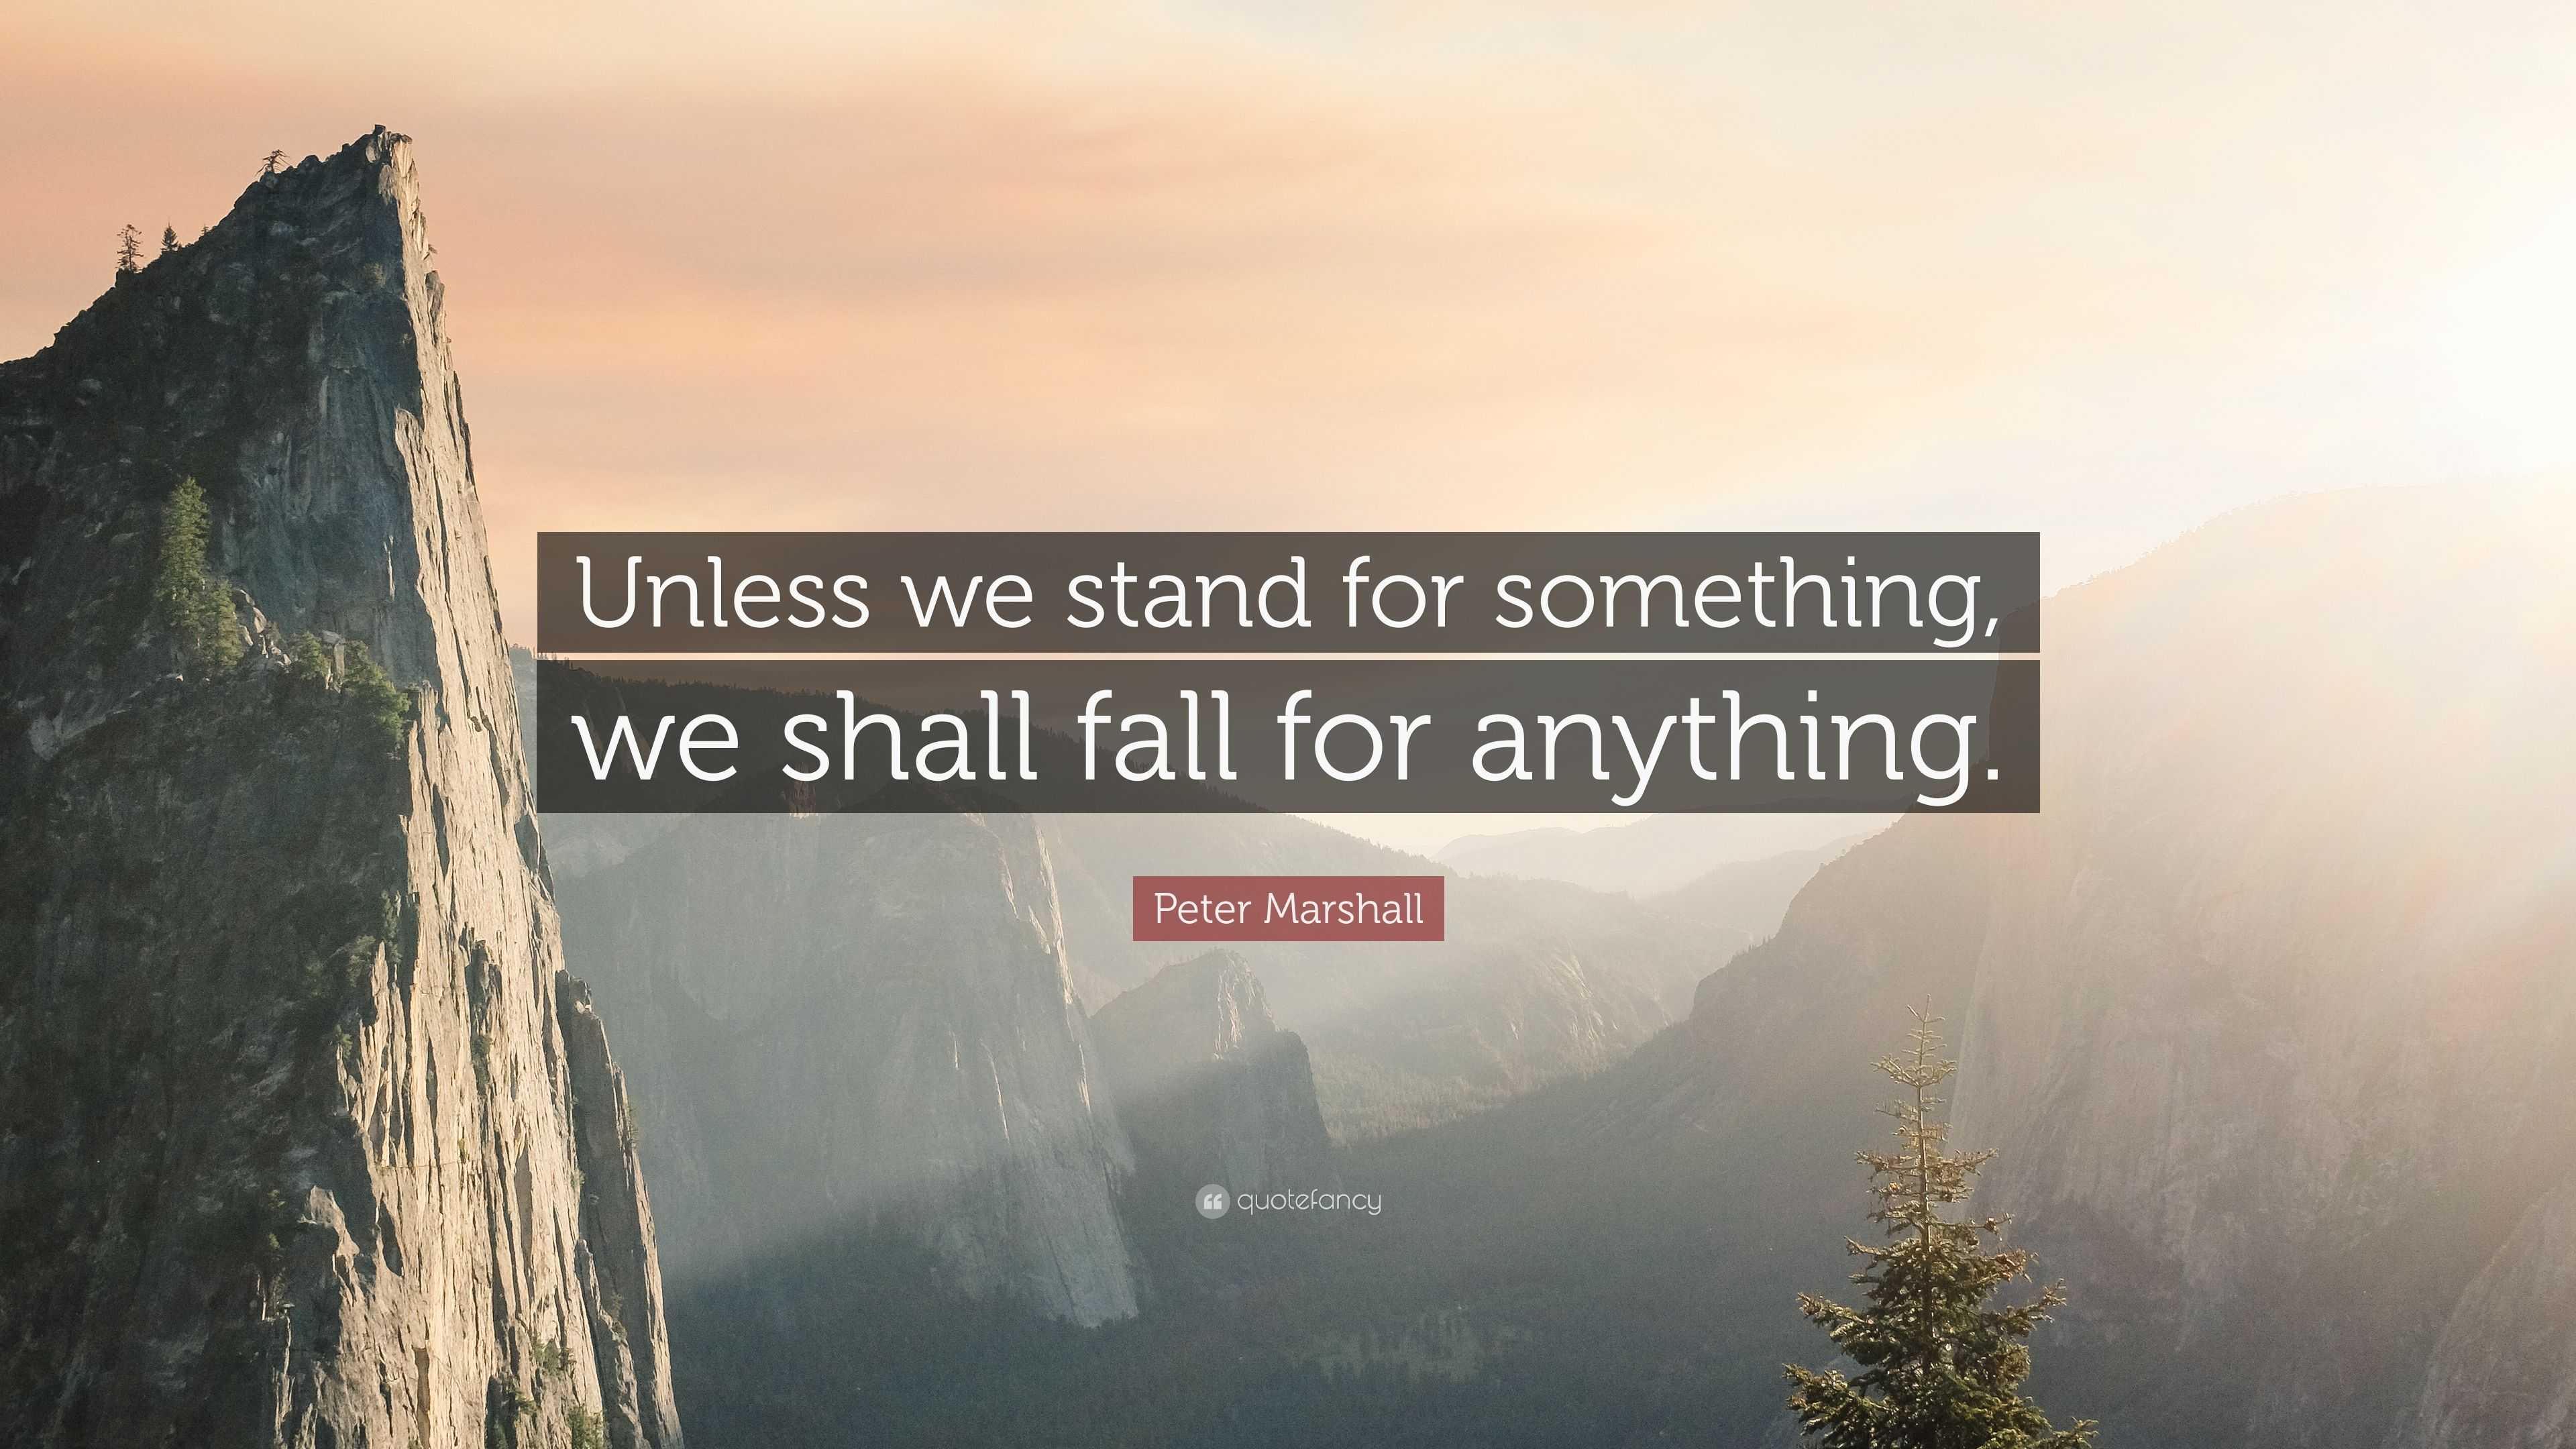 Peter Marshall - If you don't stand for something you will